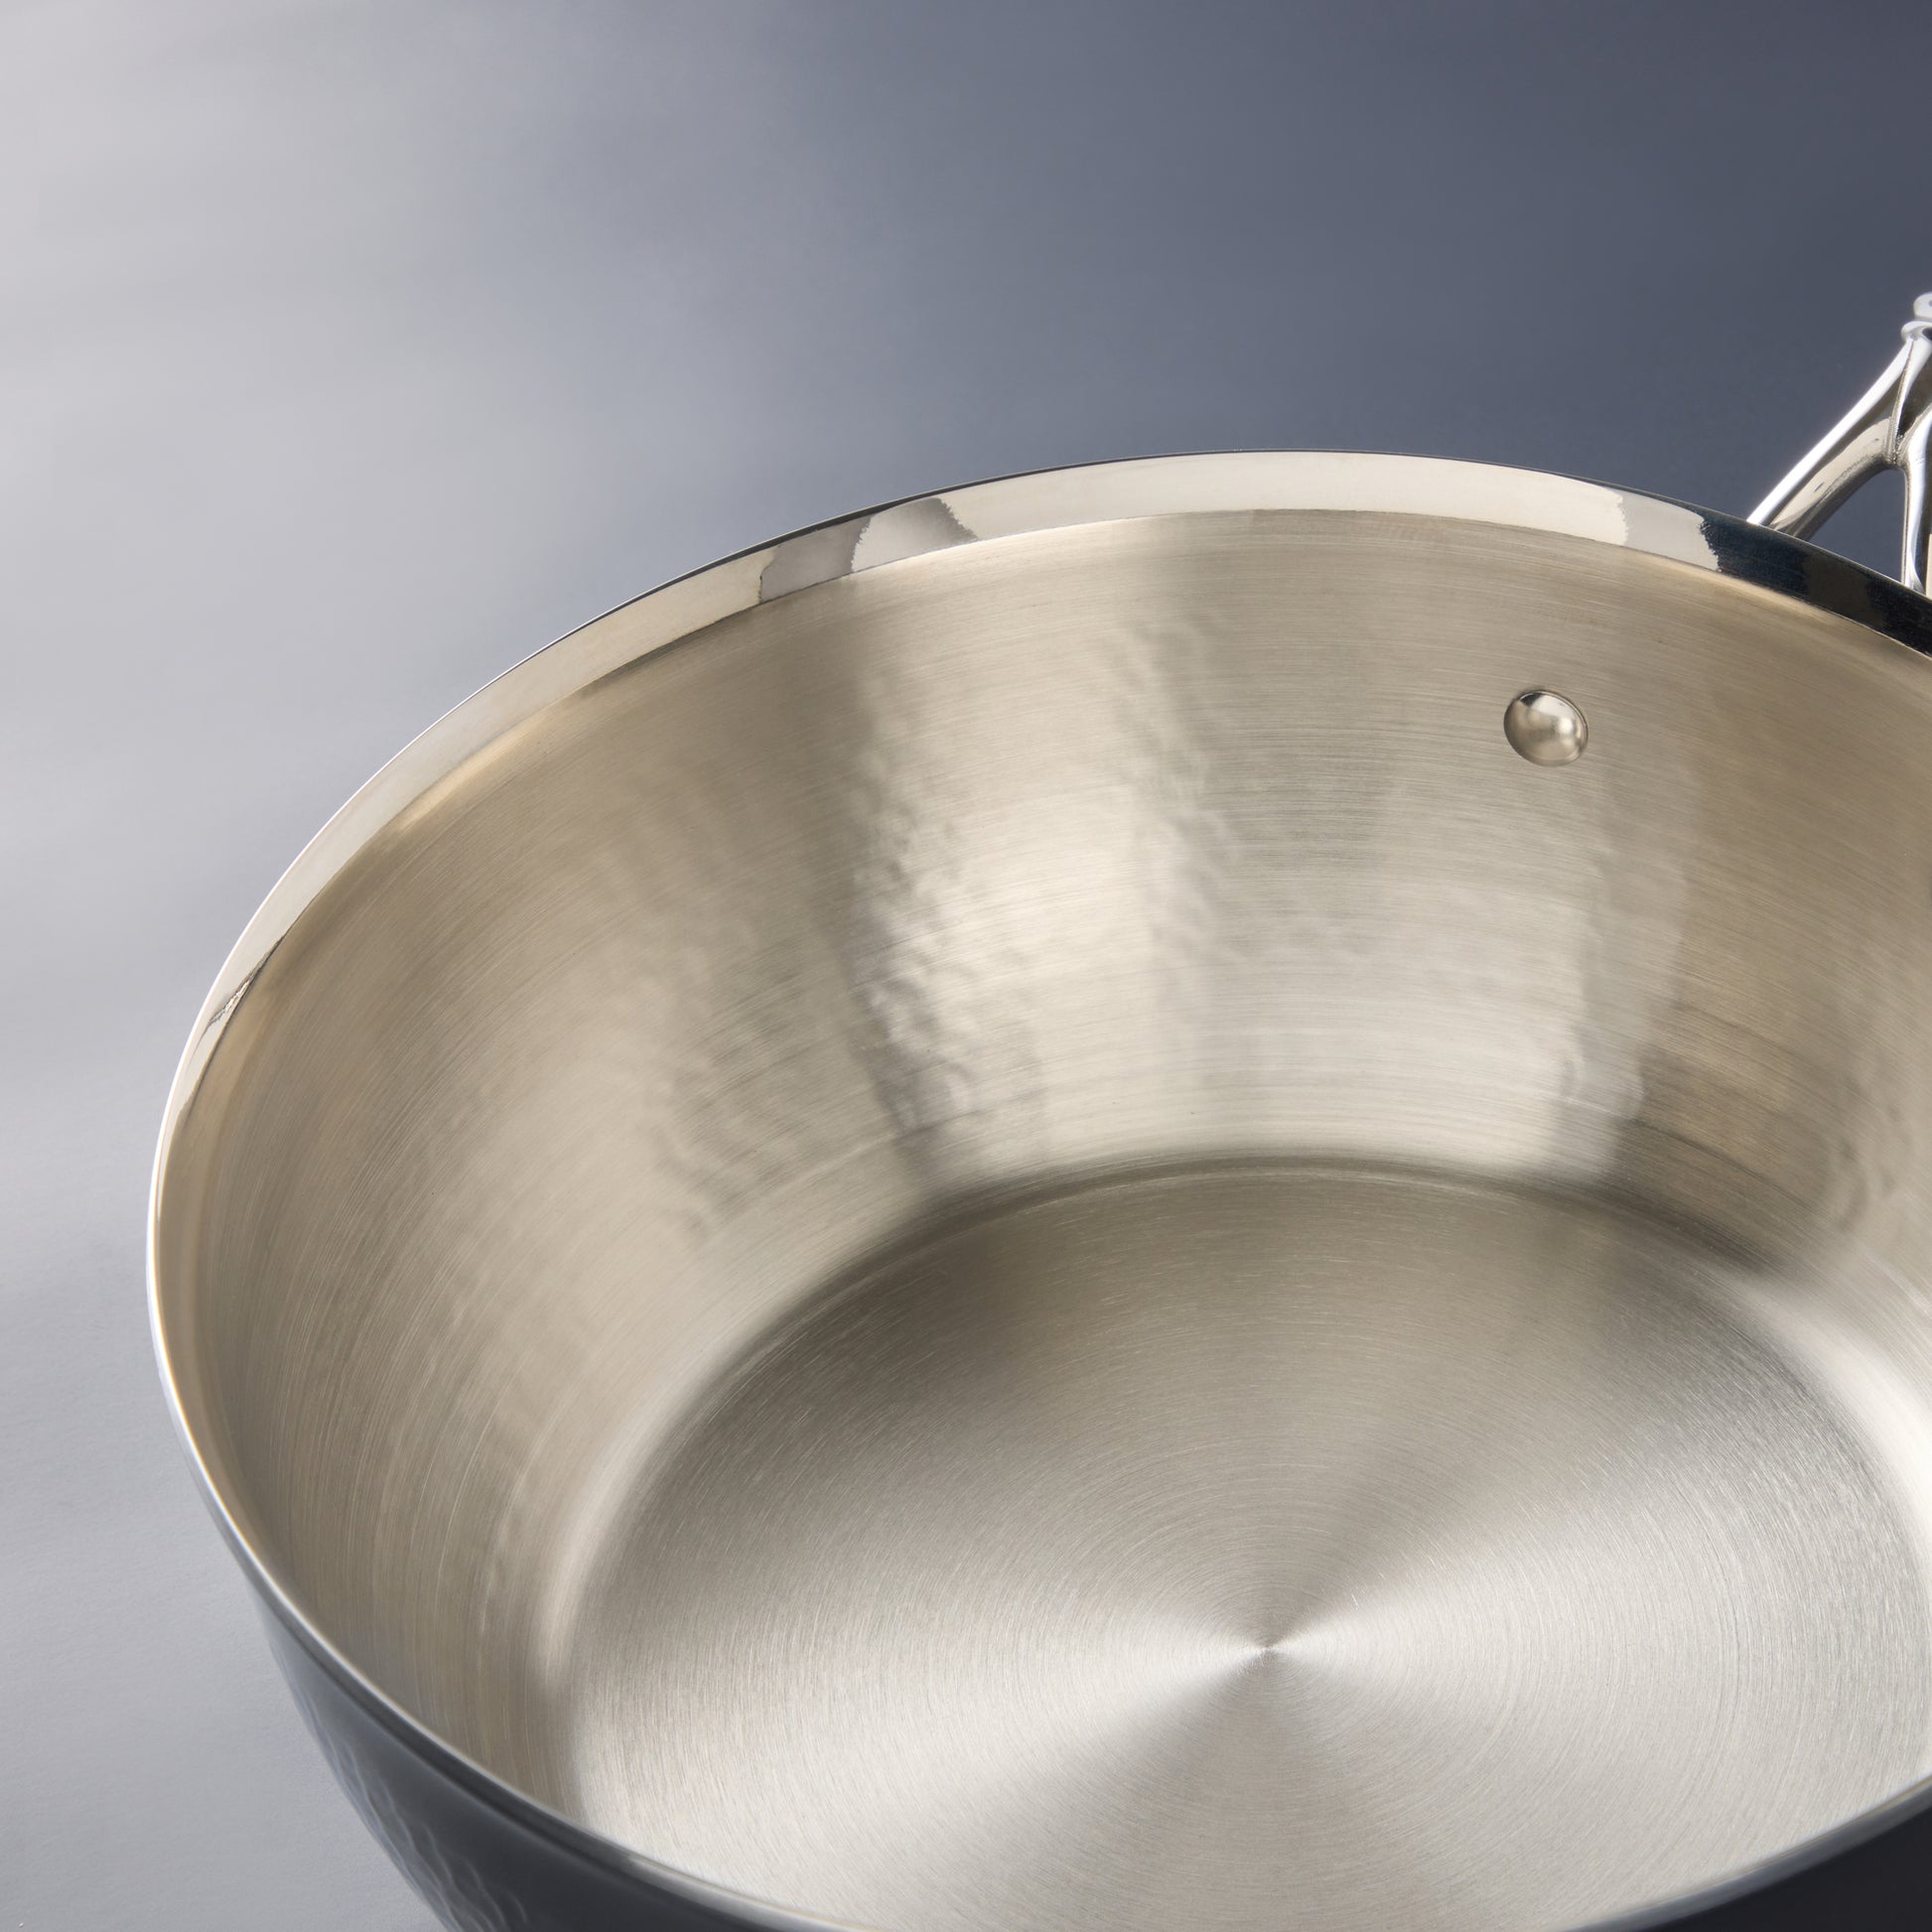 hammered stainless steel in chef pot from Ruffoni